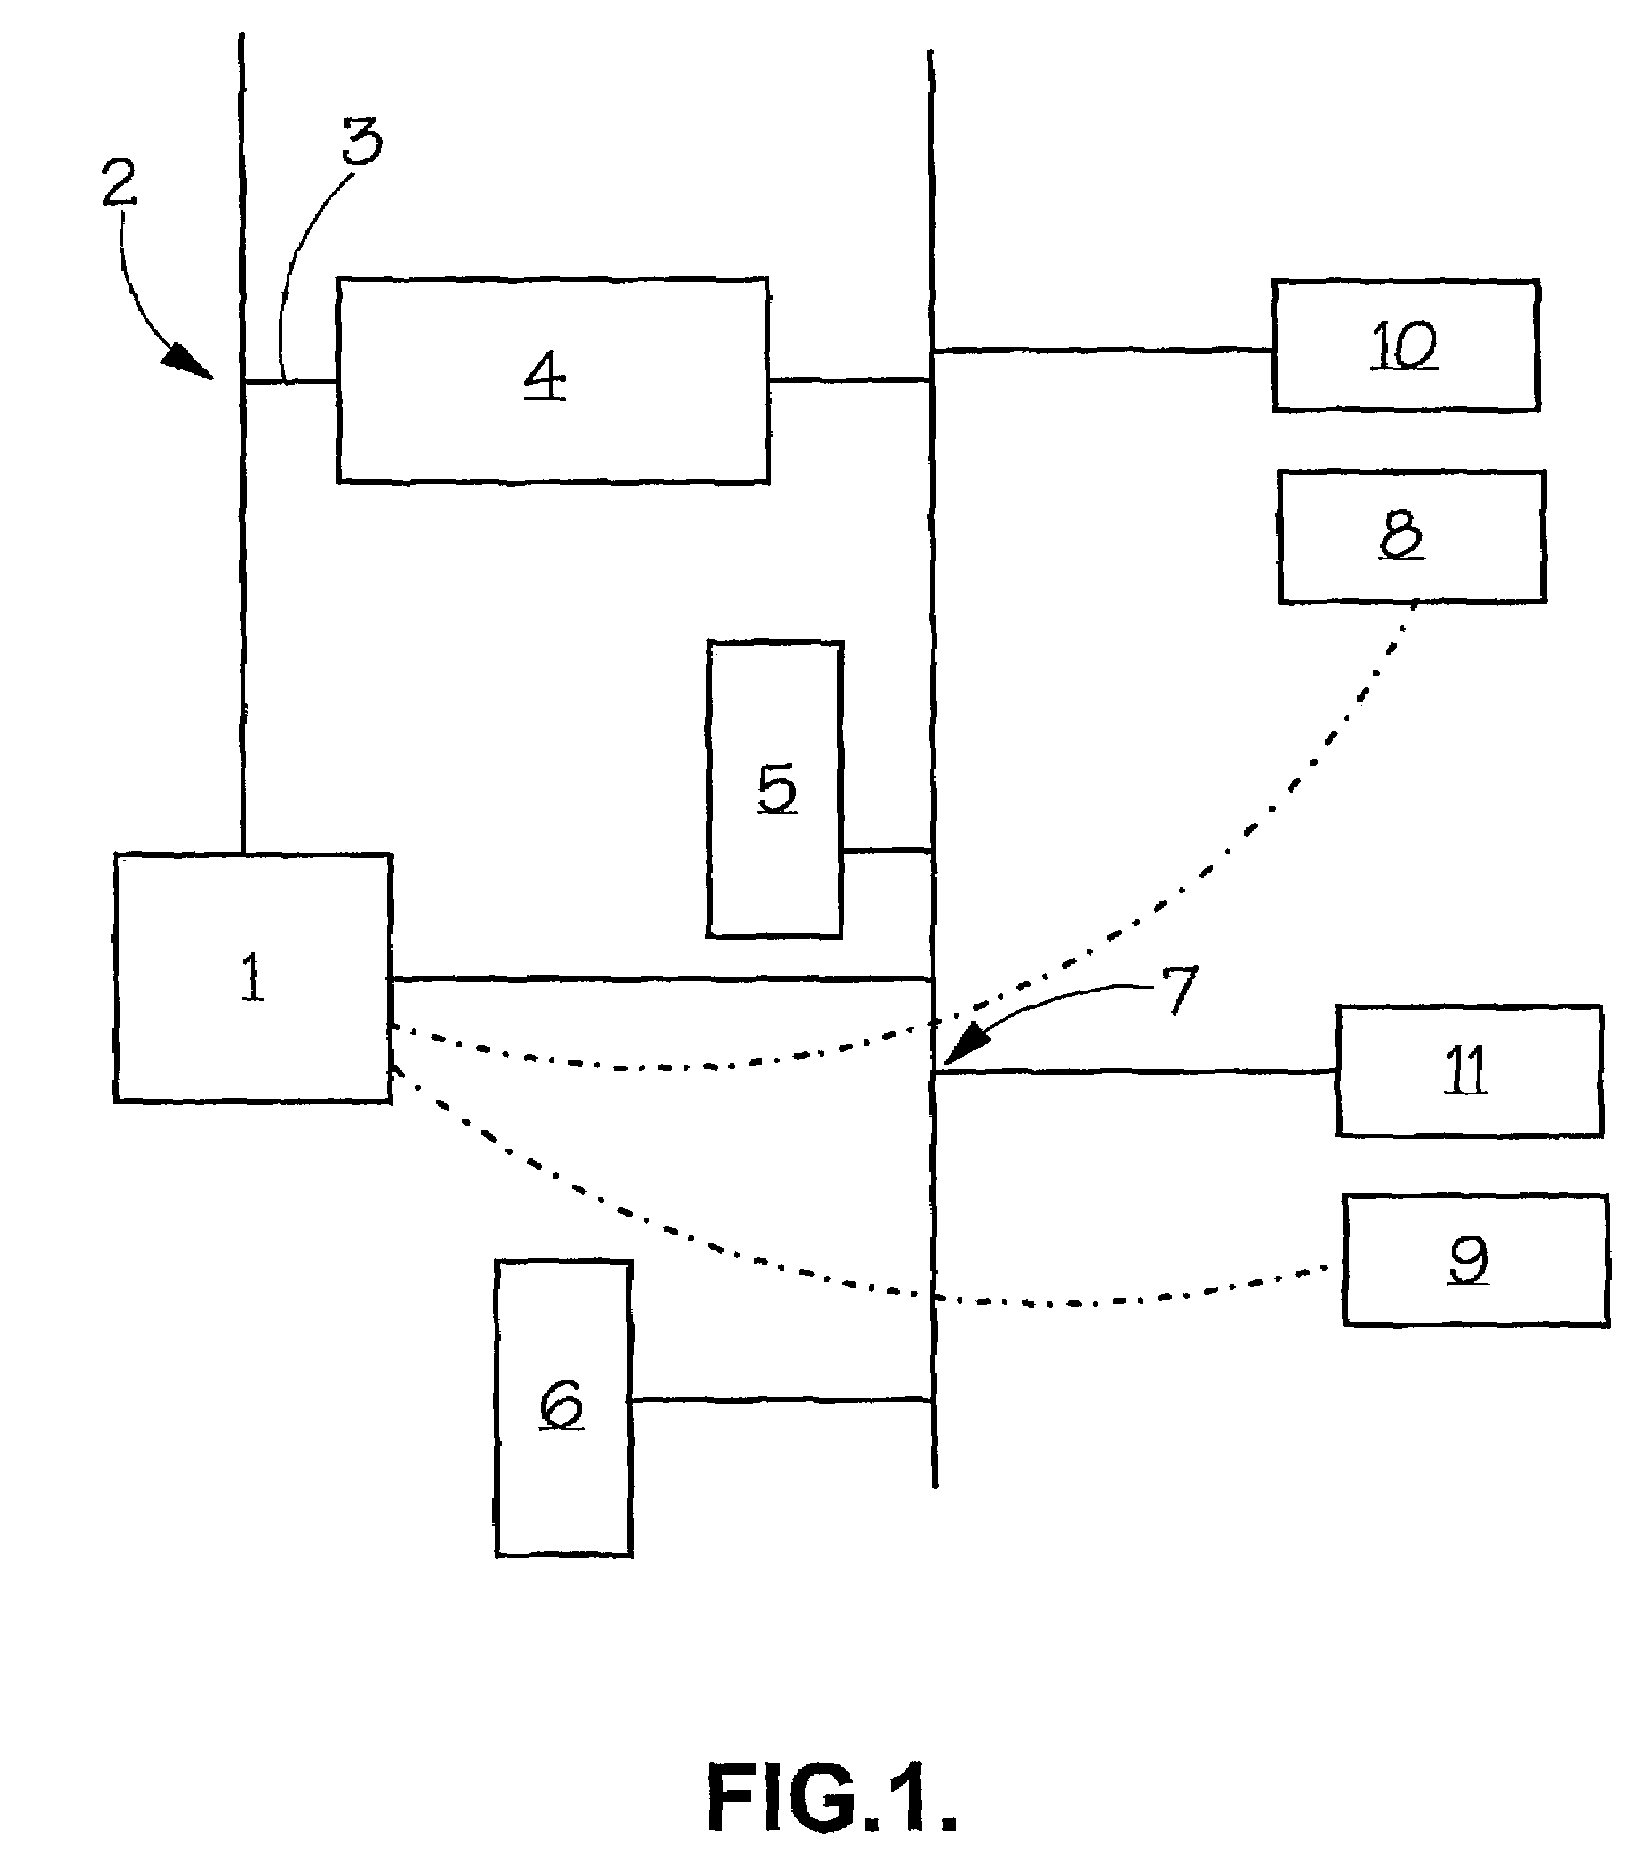 System and method for recording voice and the data entered by a call center agent and retrieval of these communication streams for analysis or correction